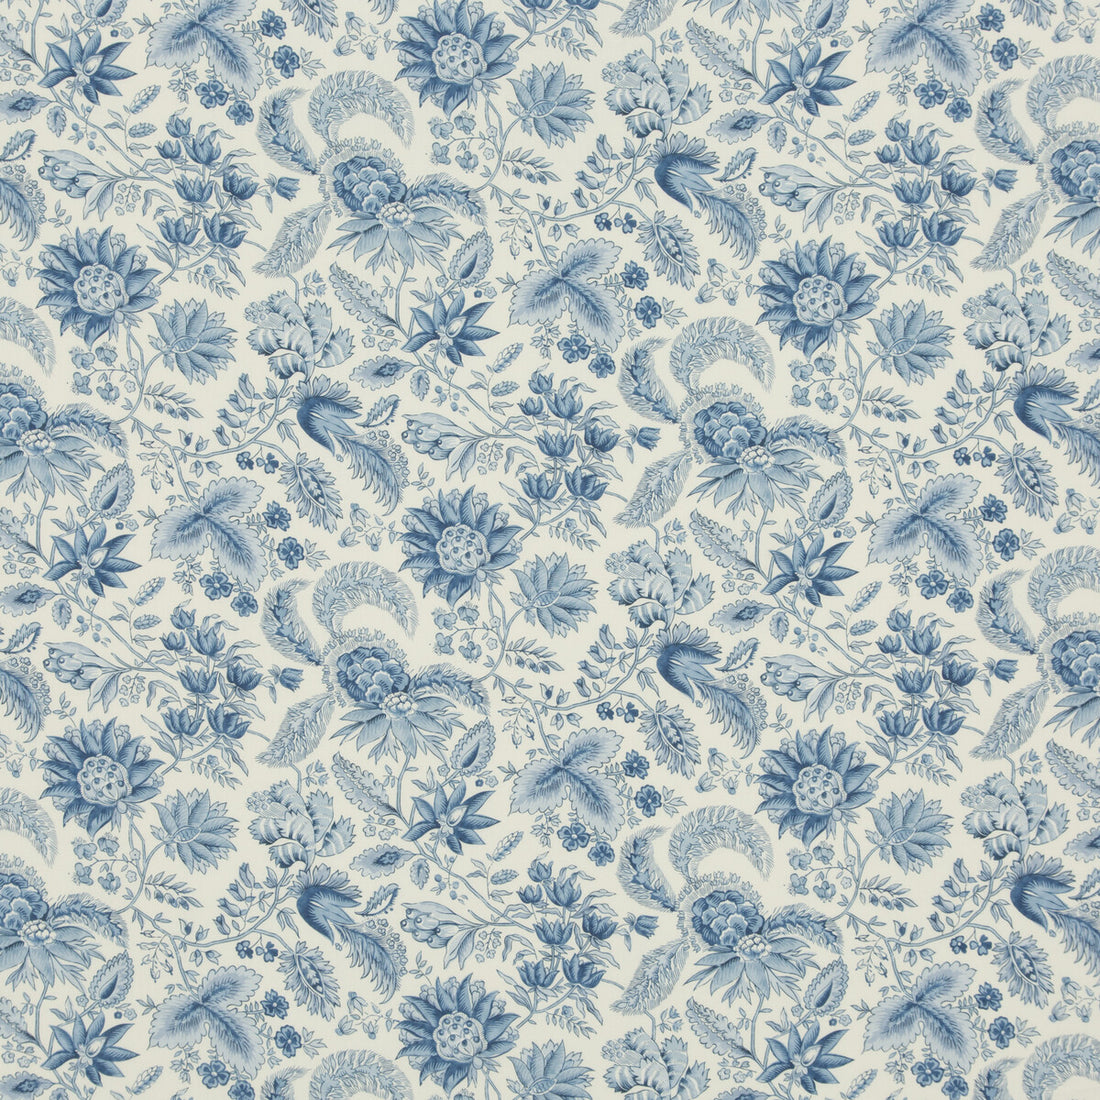 Gwendoline Print fabric in blue color - pattern 8017111.5.0 - by Brunschwig &amp; Fils in the Le Parnasse collection